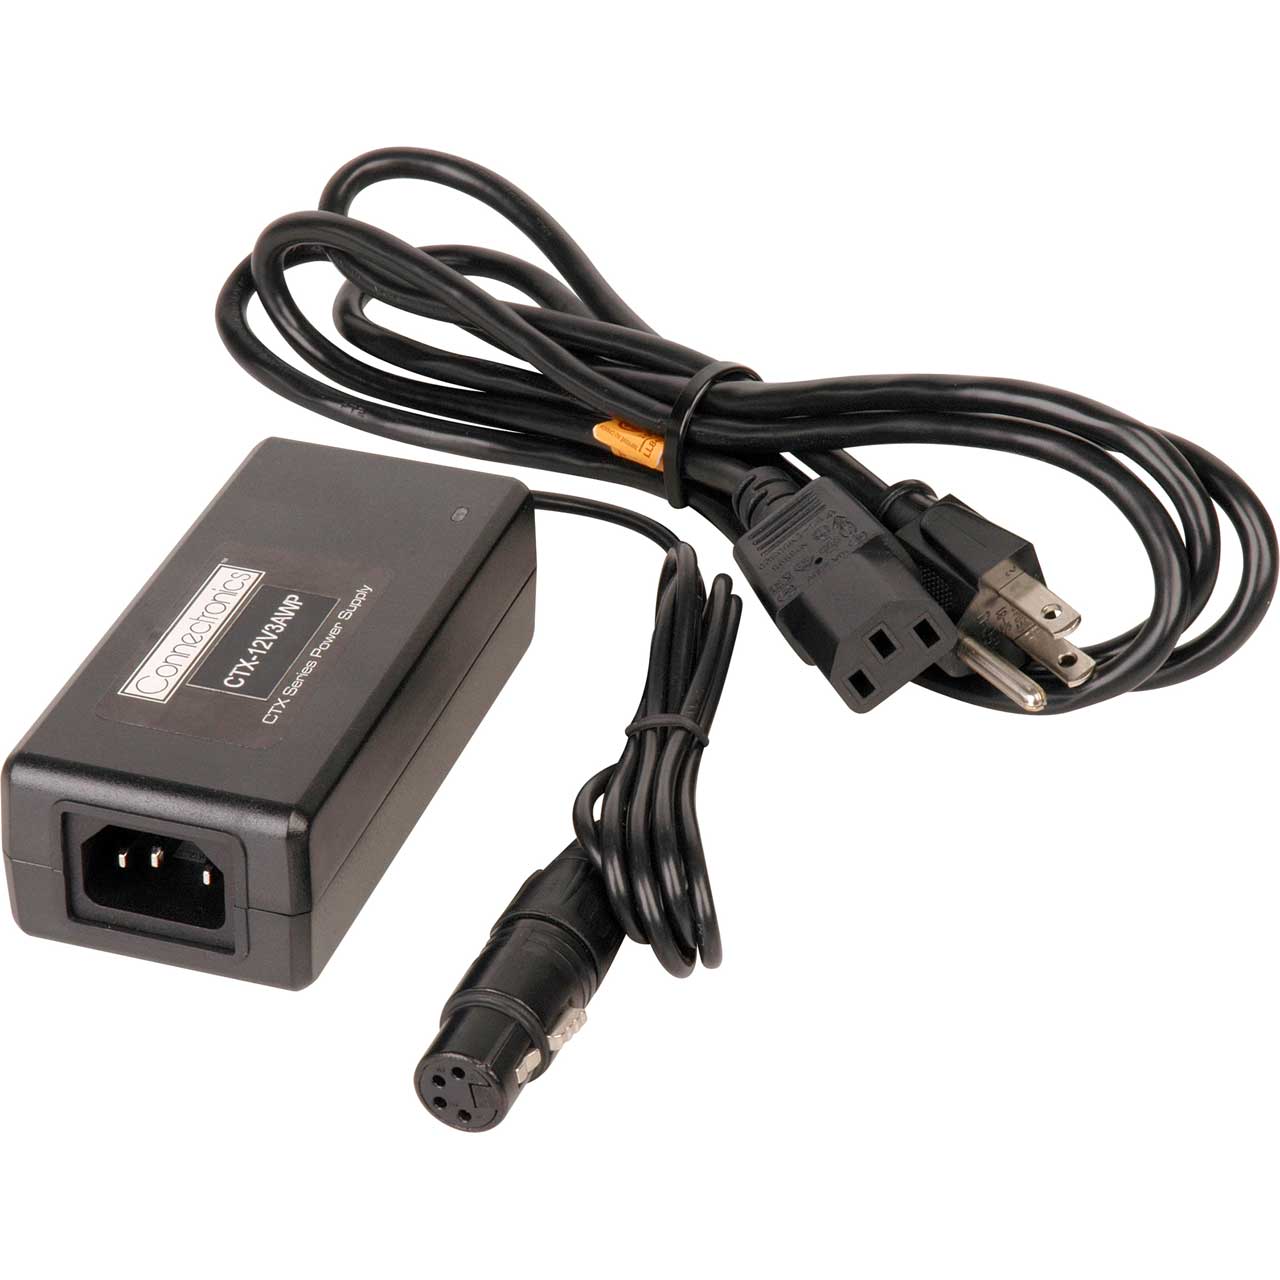 Are 12v Ac Adapters Interchangeable?